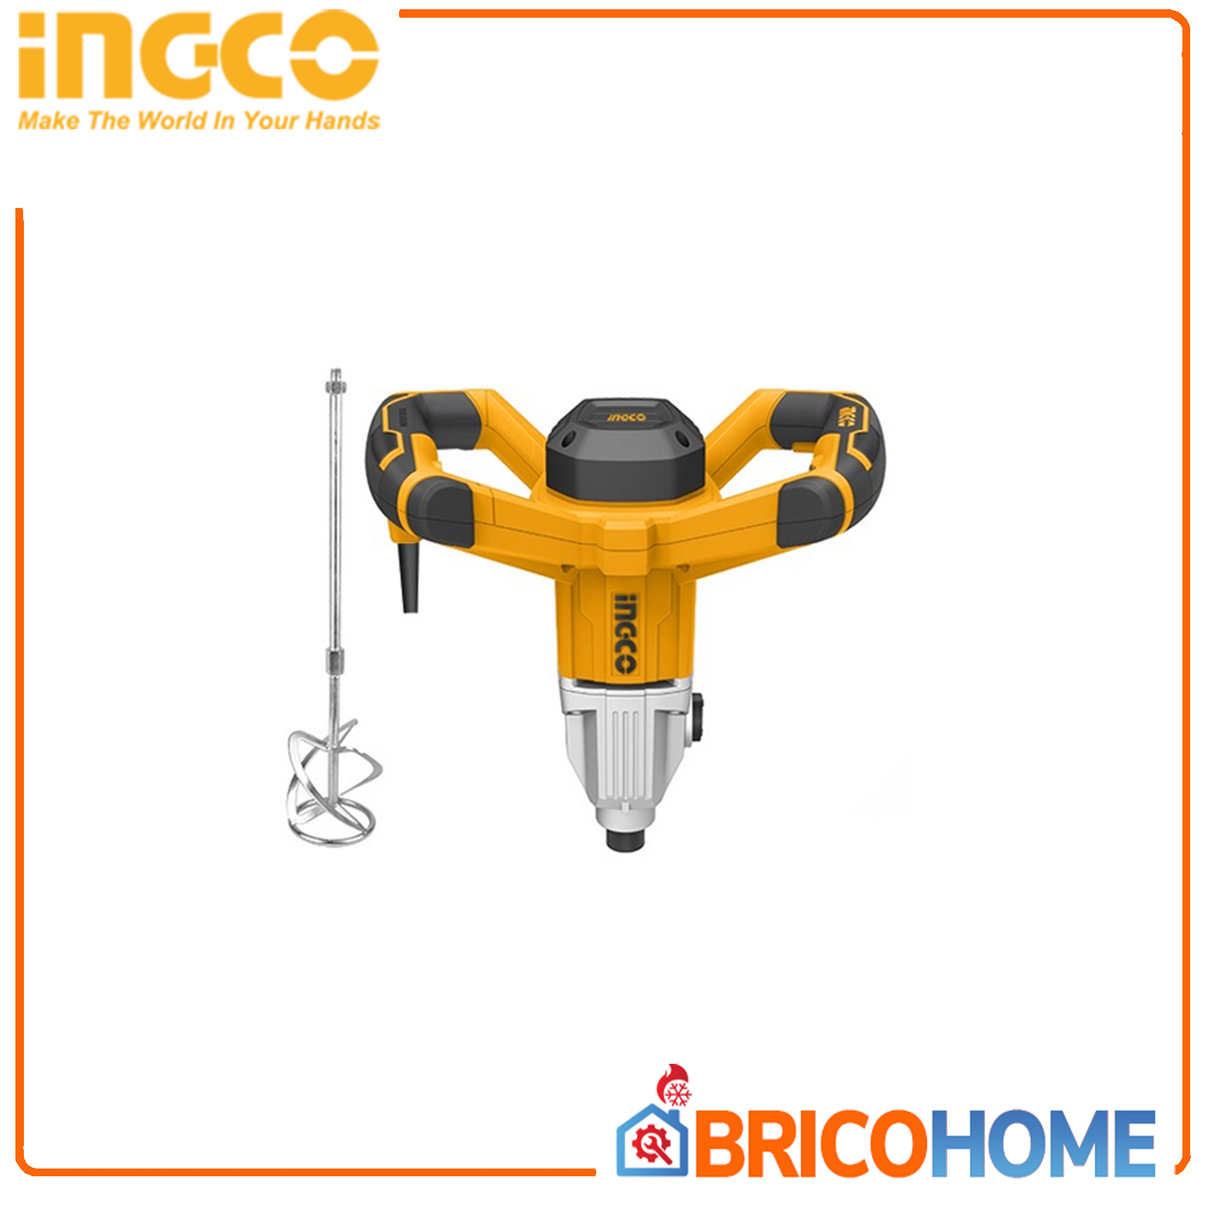 PRO 1400W mortar mixer with accessories